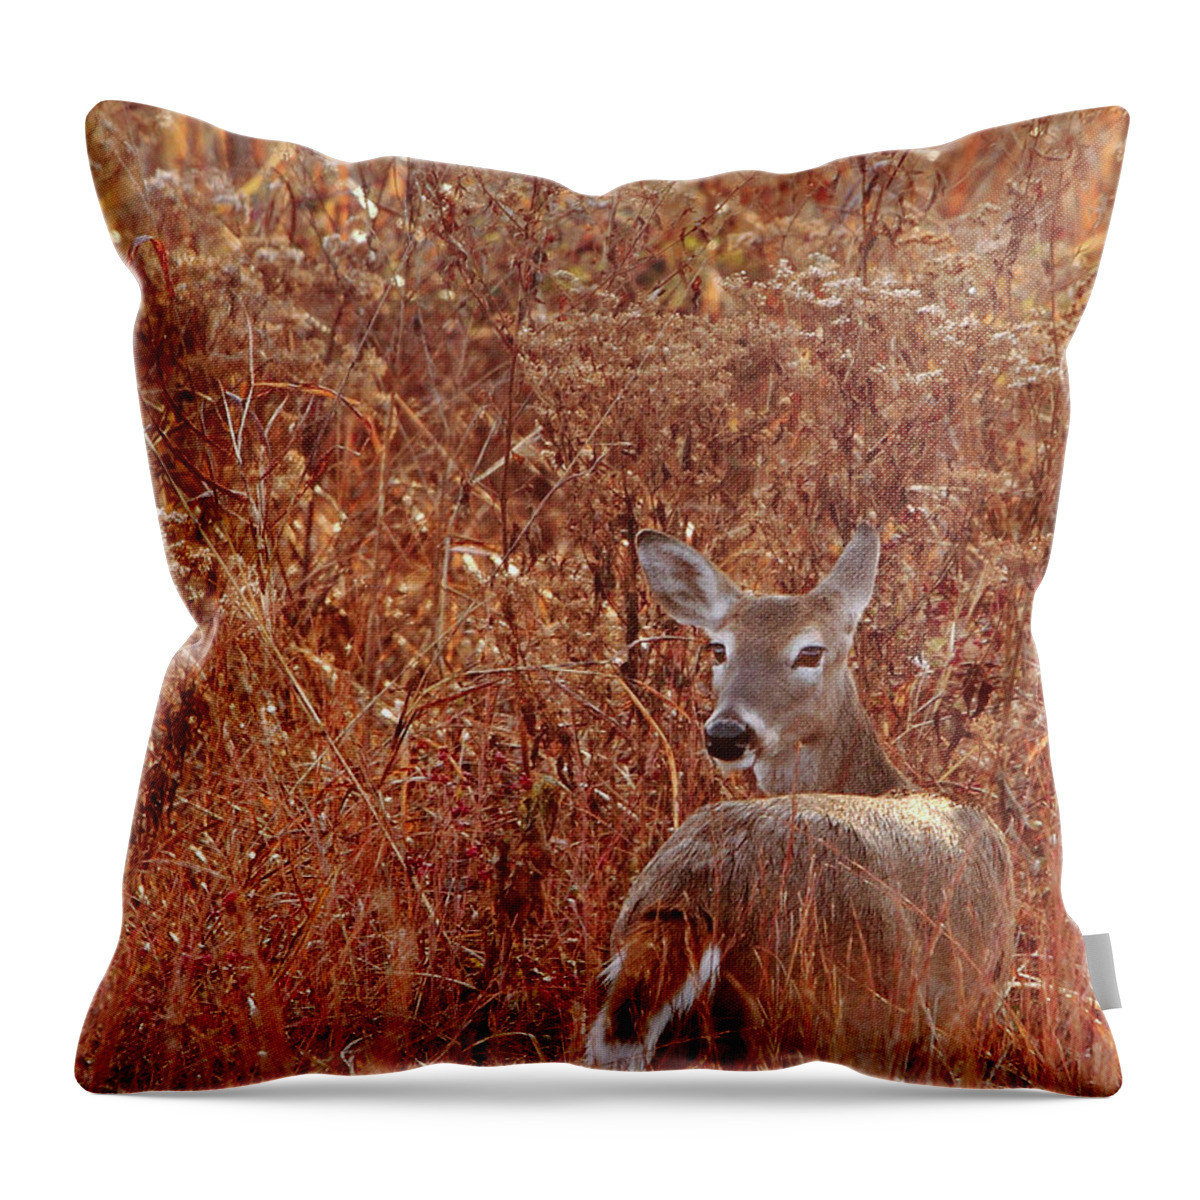 Wildlife Throw Pillow featuring the photograph Doe In Red Grass by Robert Frederick